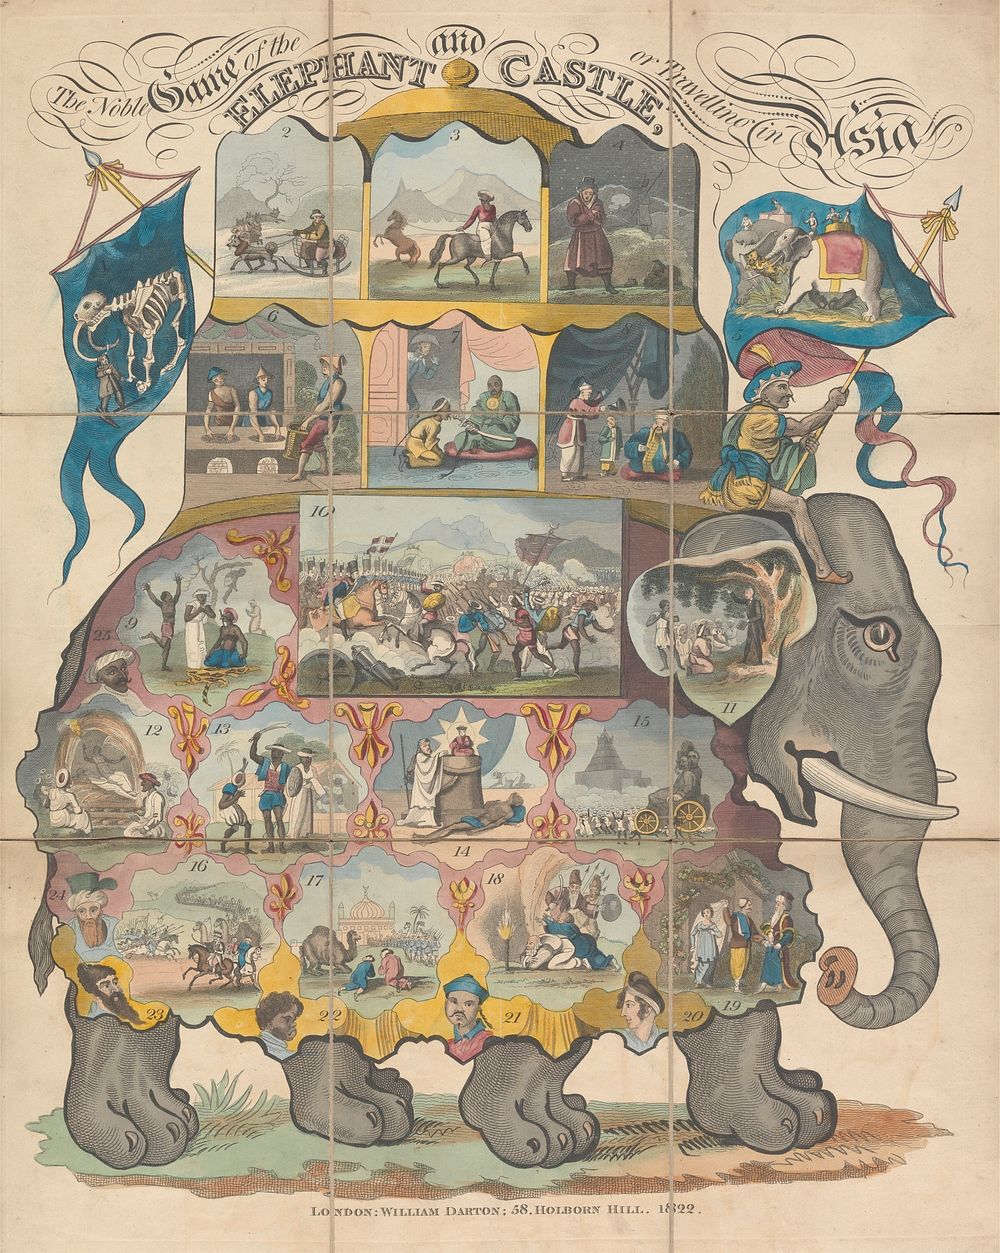 The noble game of the elephant and castle, or Travelling in Asia.